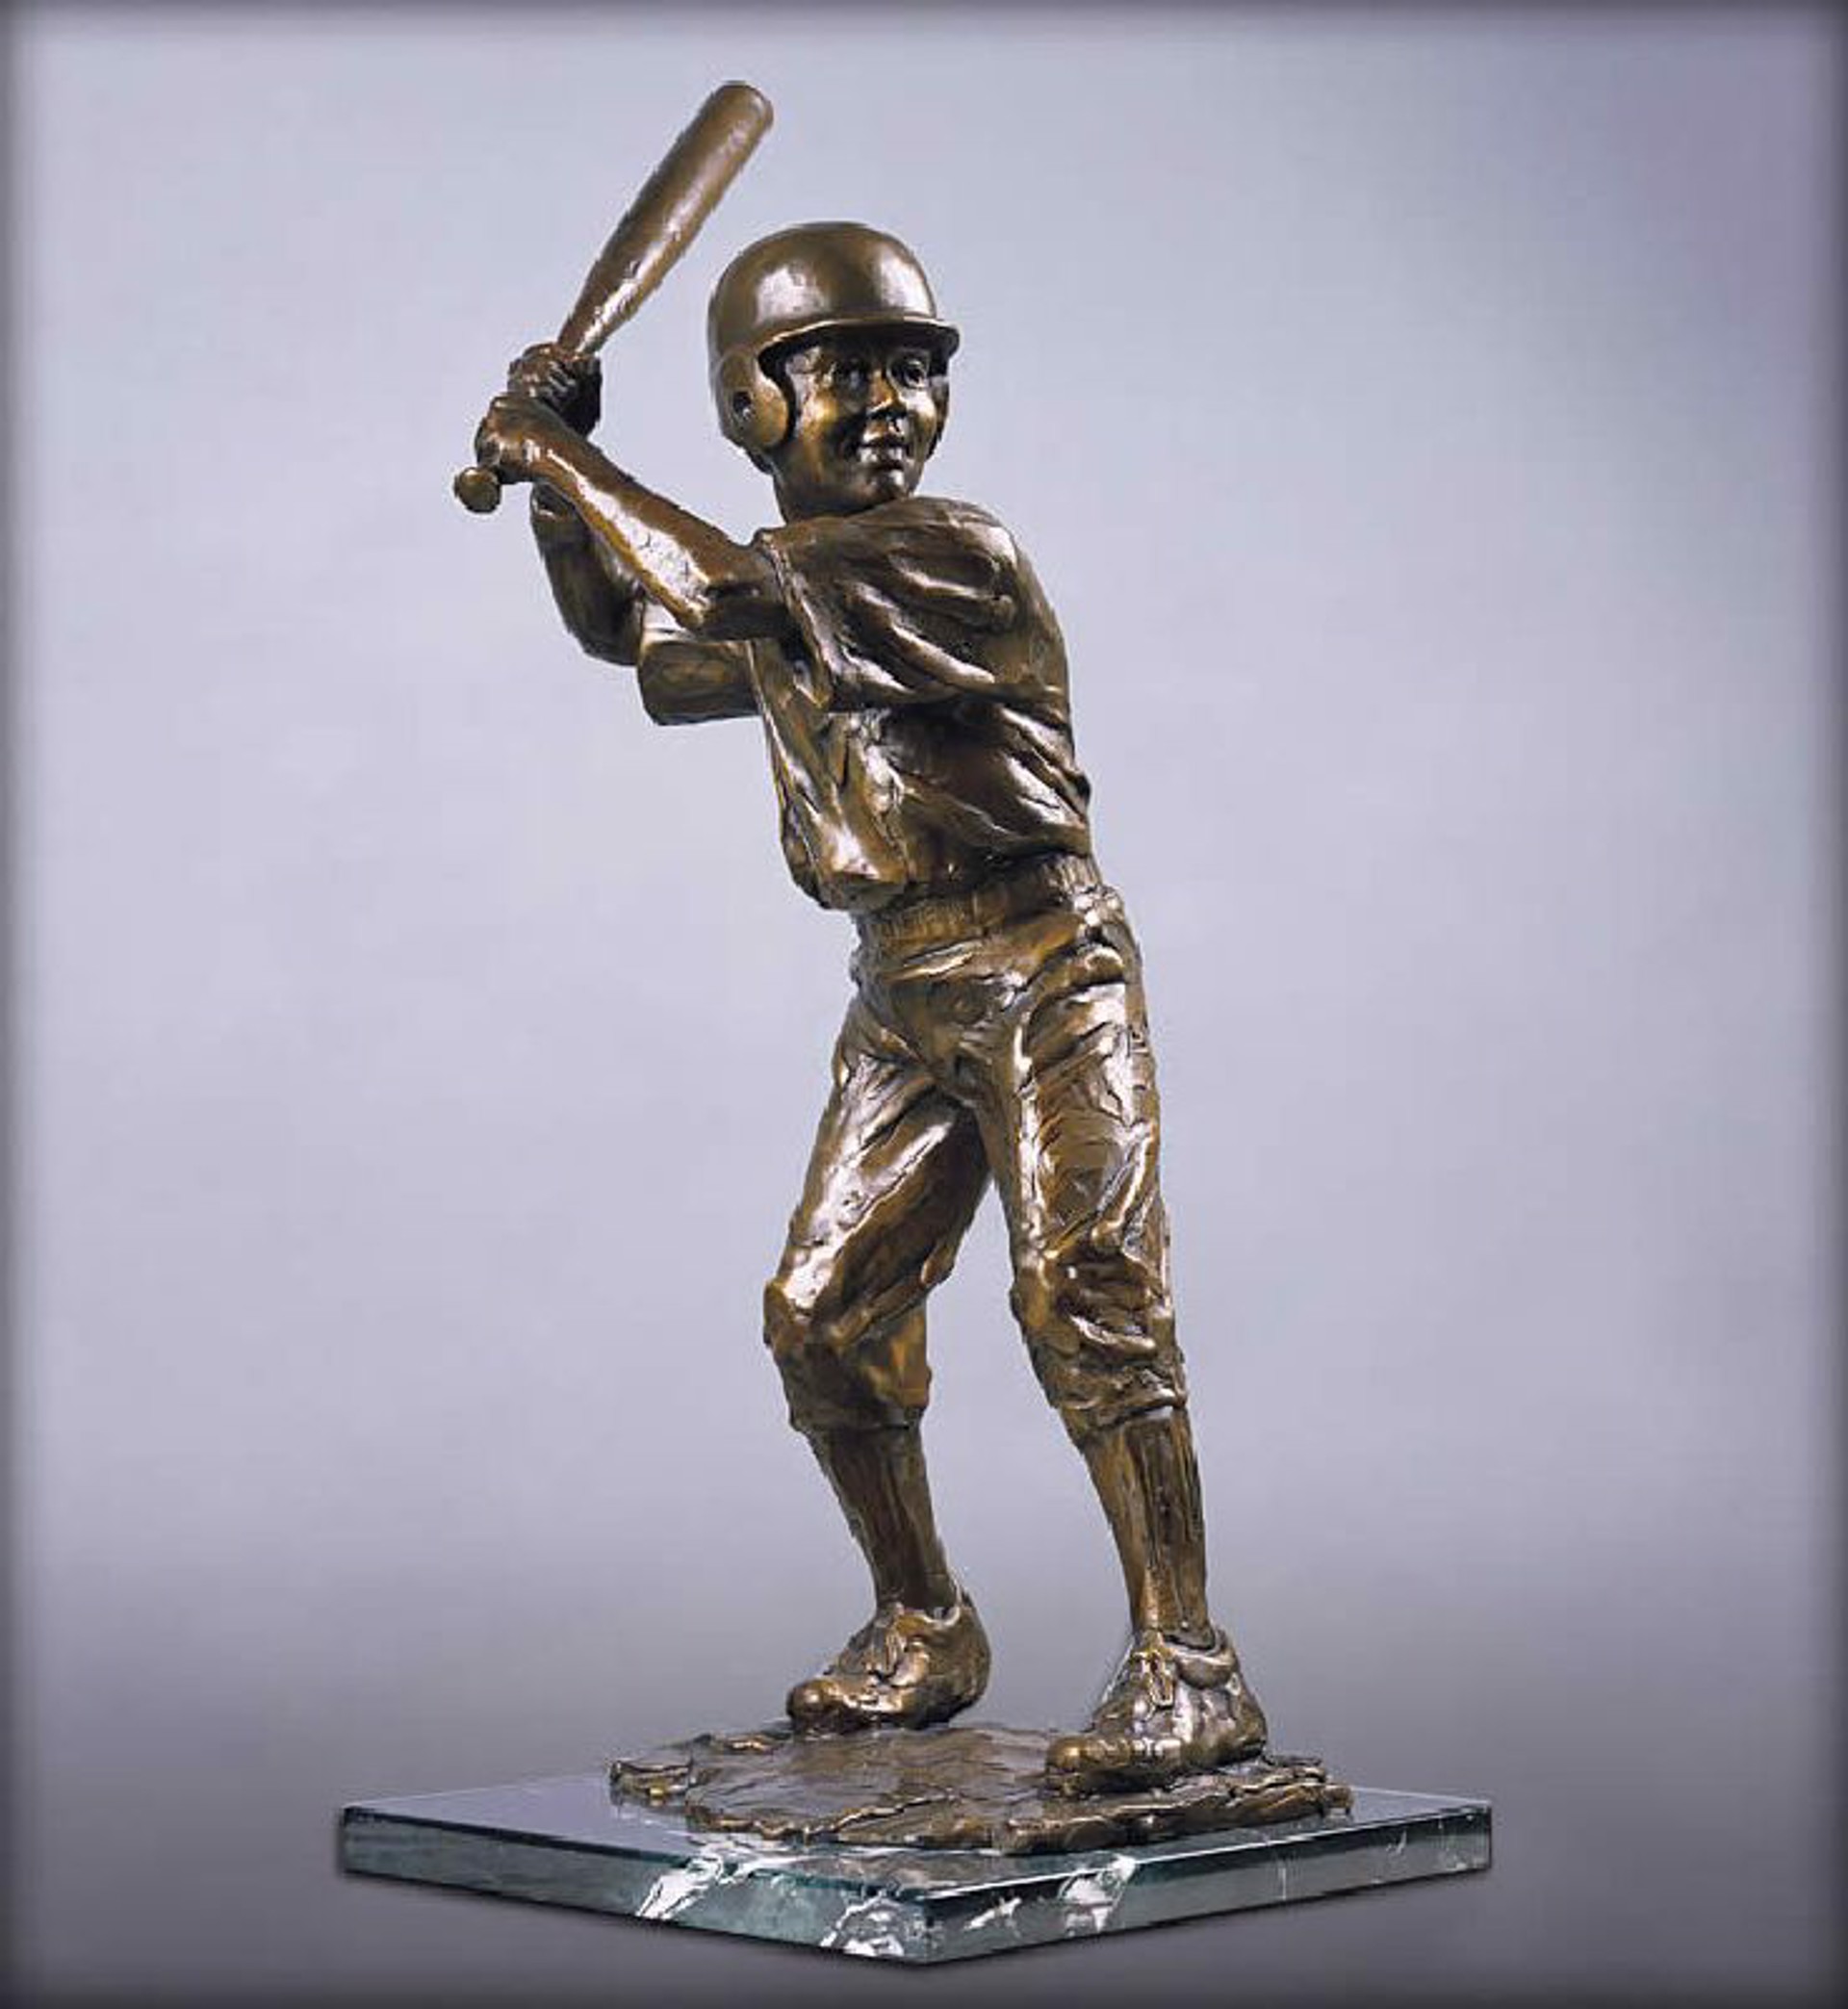 Bases Loaded by Gary Lee Price (sculptor)